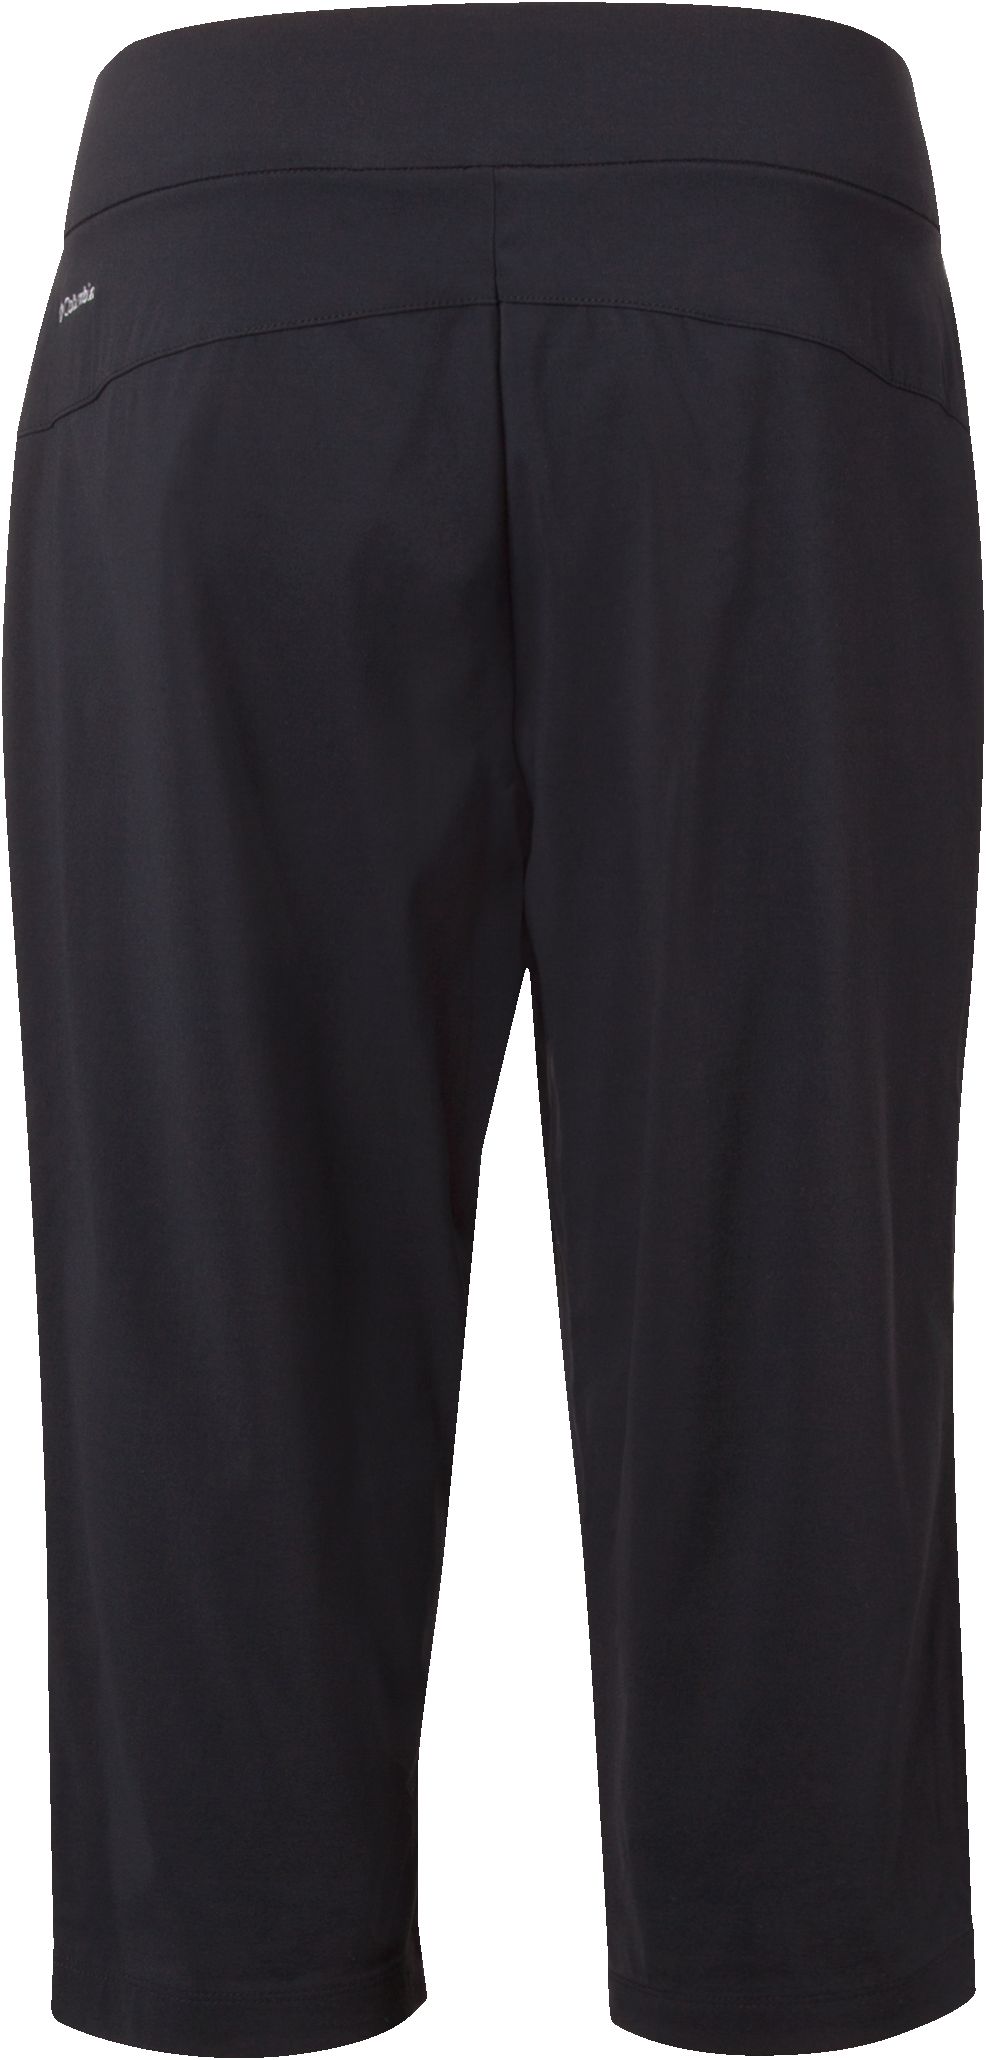 Columbia Women's Anytime Casual Capri Pants, Outdoor, Mid Rise, Stretch